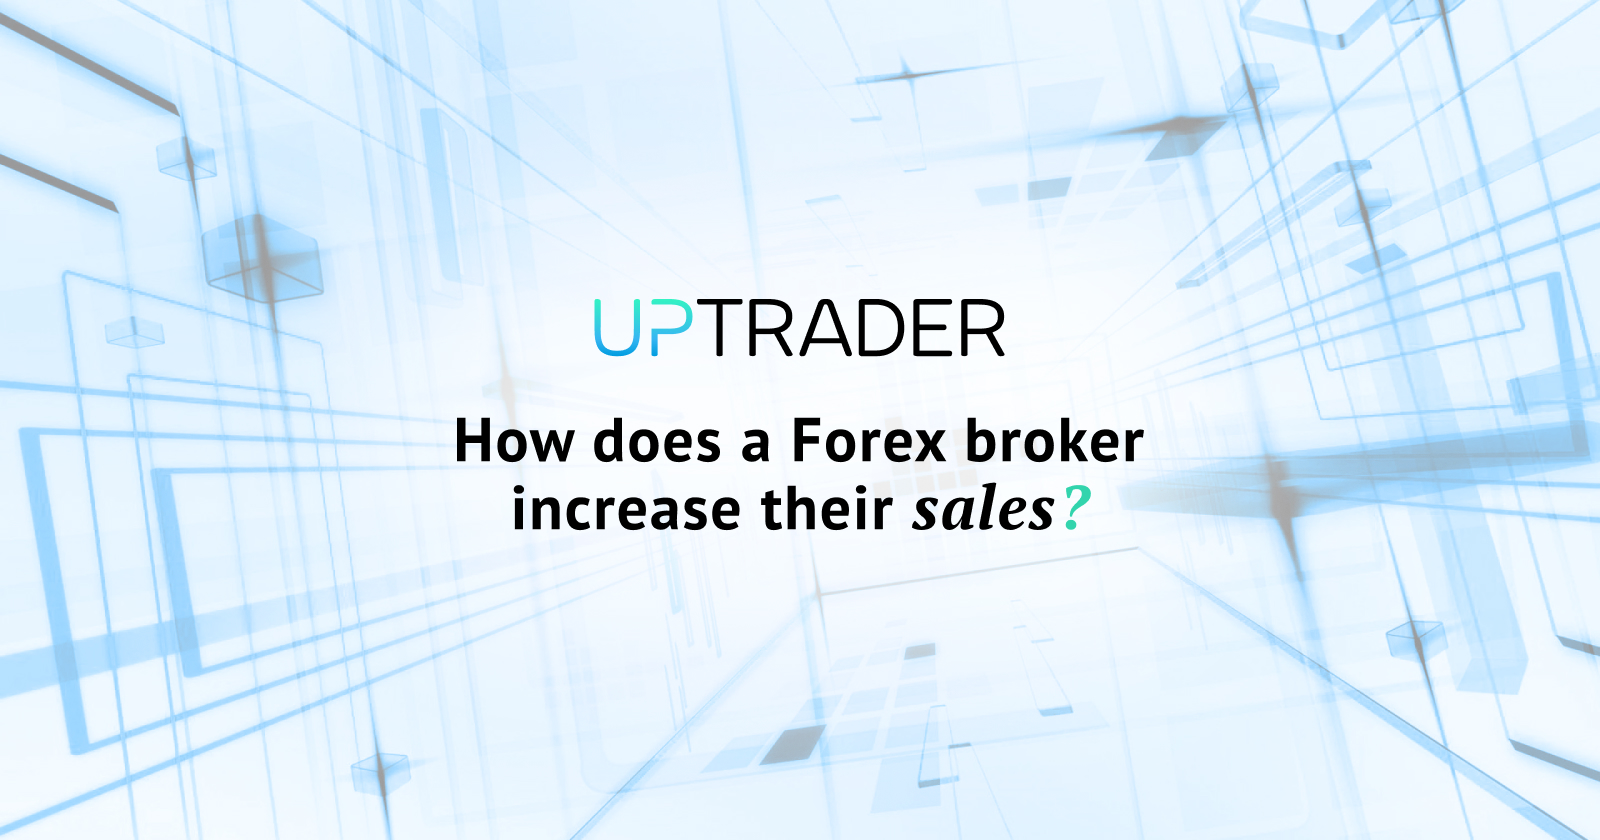 How does a Forex broker increase their sales?